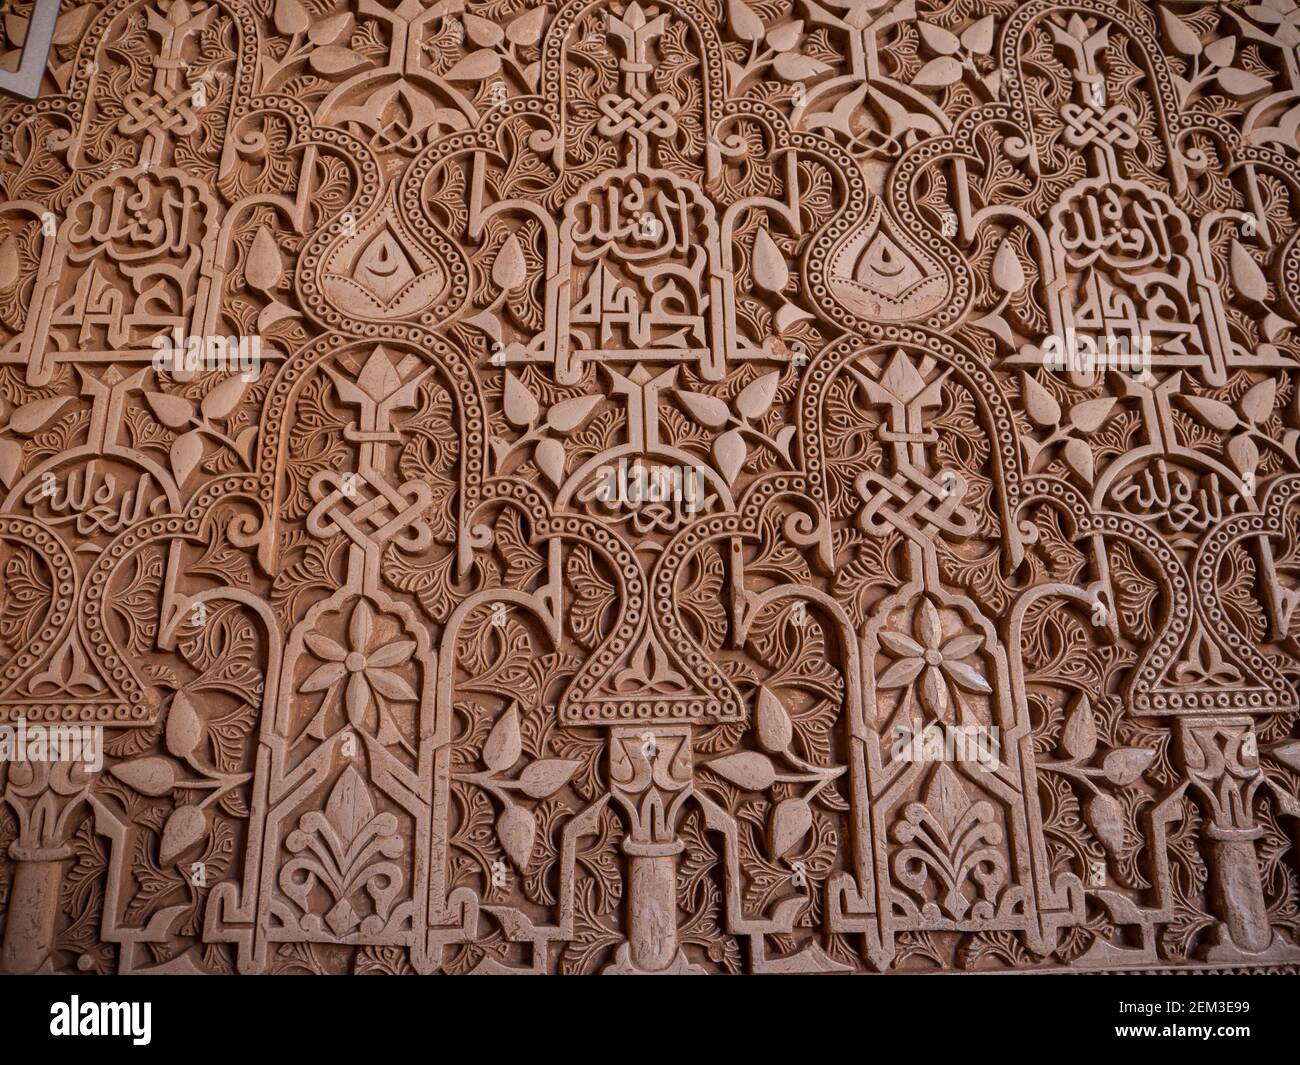 Relief work on the walls inside The Alhambra, Granada,Spain. Stock Photo